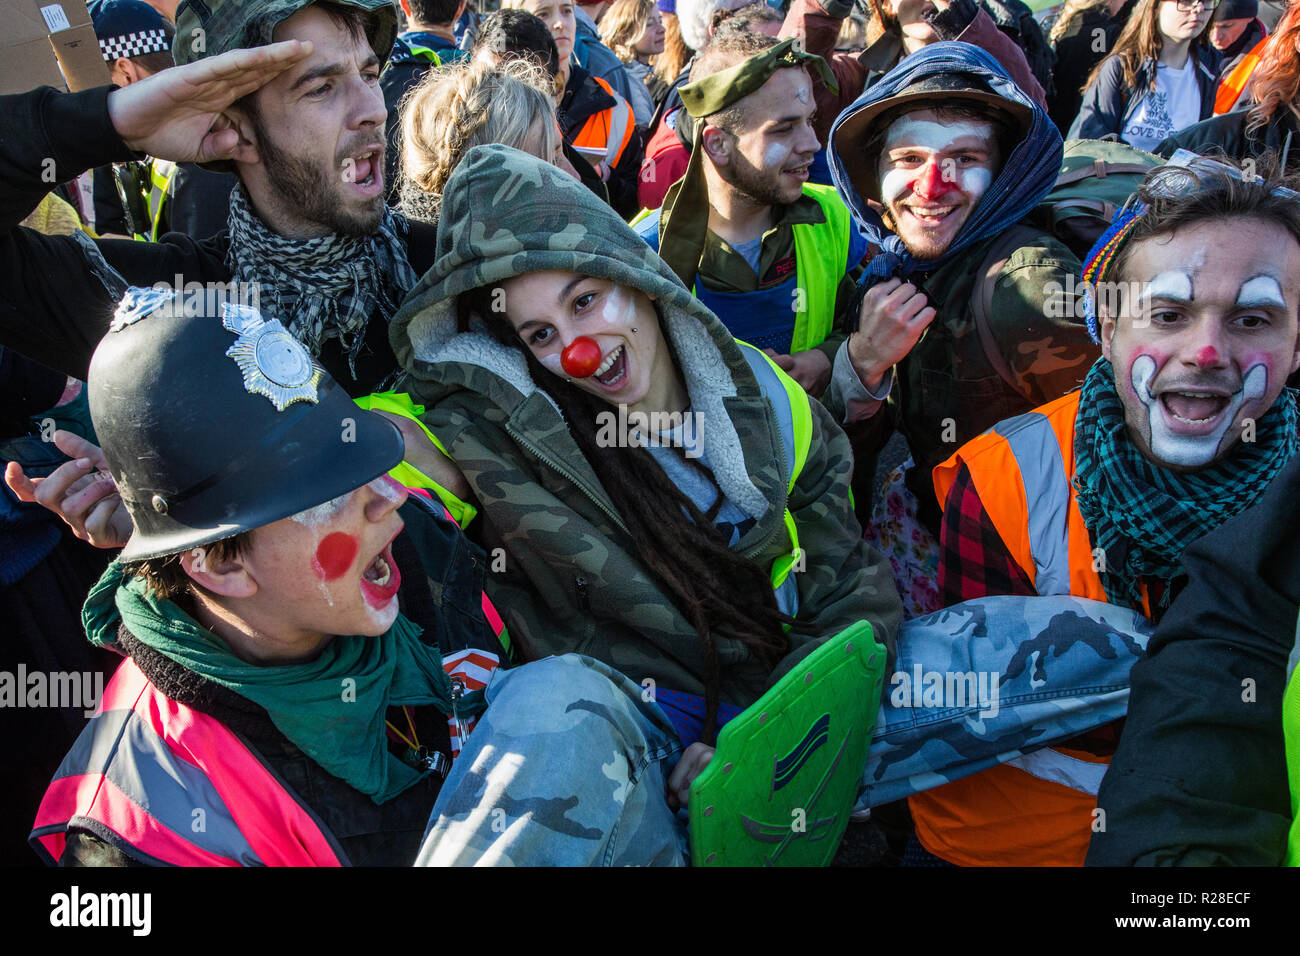 London, UK. 17th November, 2018. Clowns from Clandestine Insurgent Rebel Clown Army (CIRCA) mime a police arrest as they support environmental campaigners from Extinction Rebellion blocking Lambeth Bridge, one of five bridges blocked in central London, as part of a Rebellion Day event to highlight 'criminal inaction in the face of climate change catastrophe and ecological collapse' by the UK Government as part of a programme of civil disobedience during which scores of campaigners have been arrested. Credit: Mark Kerrison/Alamy Live News Stock Photo